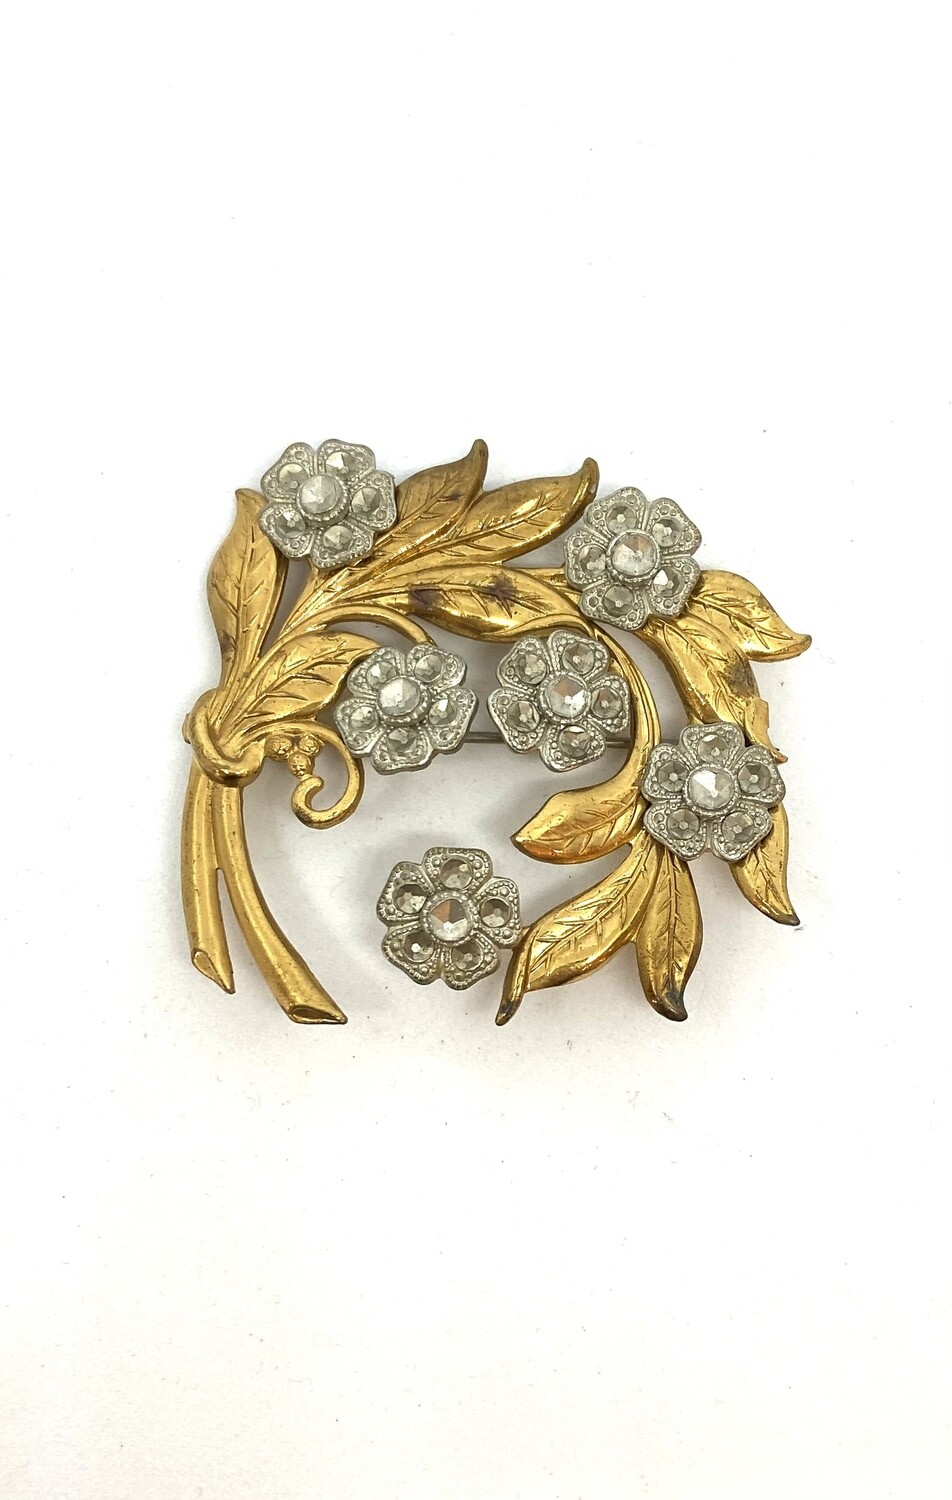 Art Nouveau Gold and Silver Flower Brooch